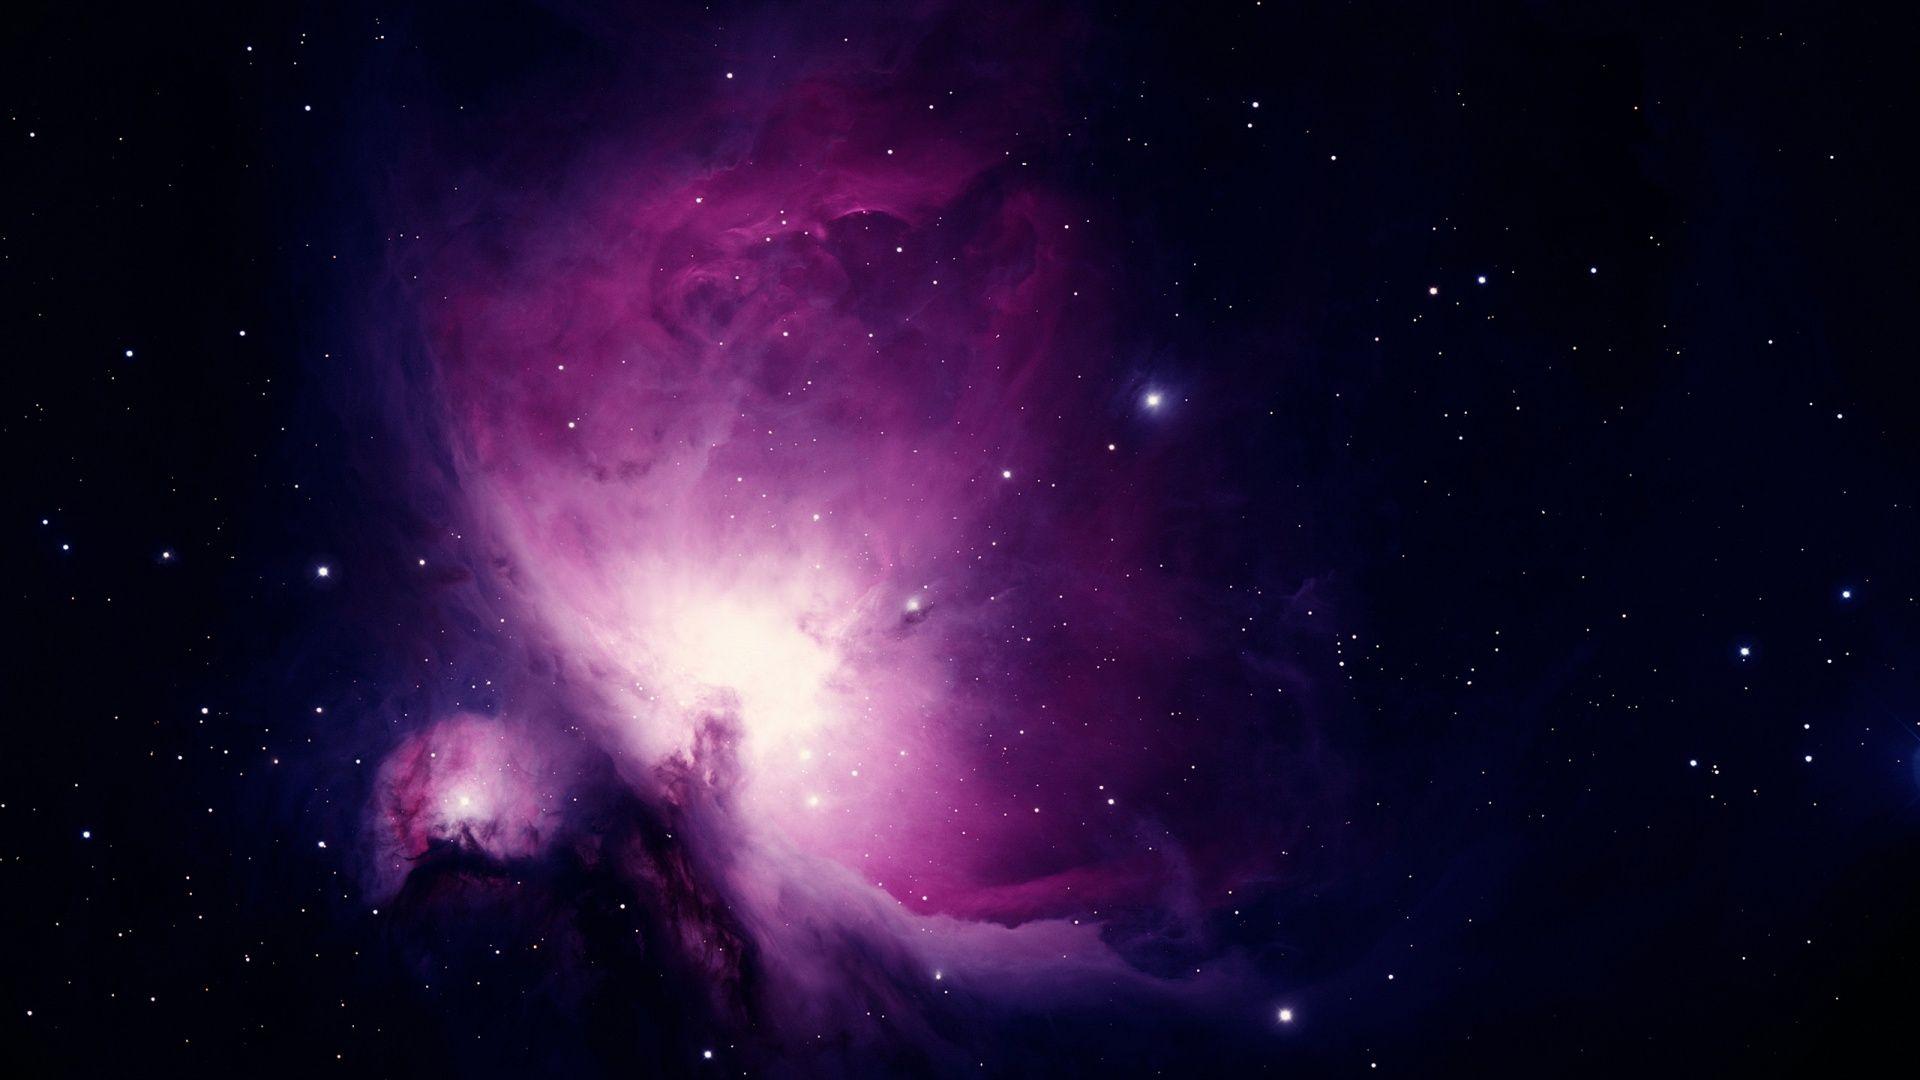 Colorful Stars in Galaxy Wallpaper in jpg format for free download